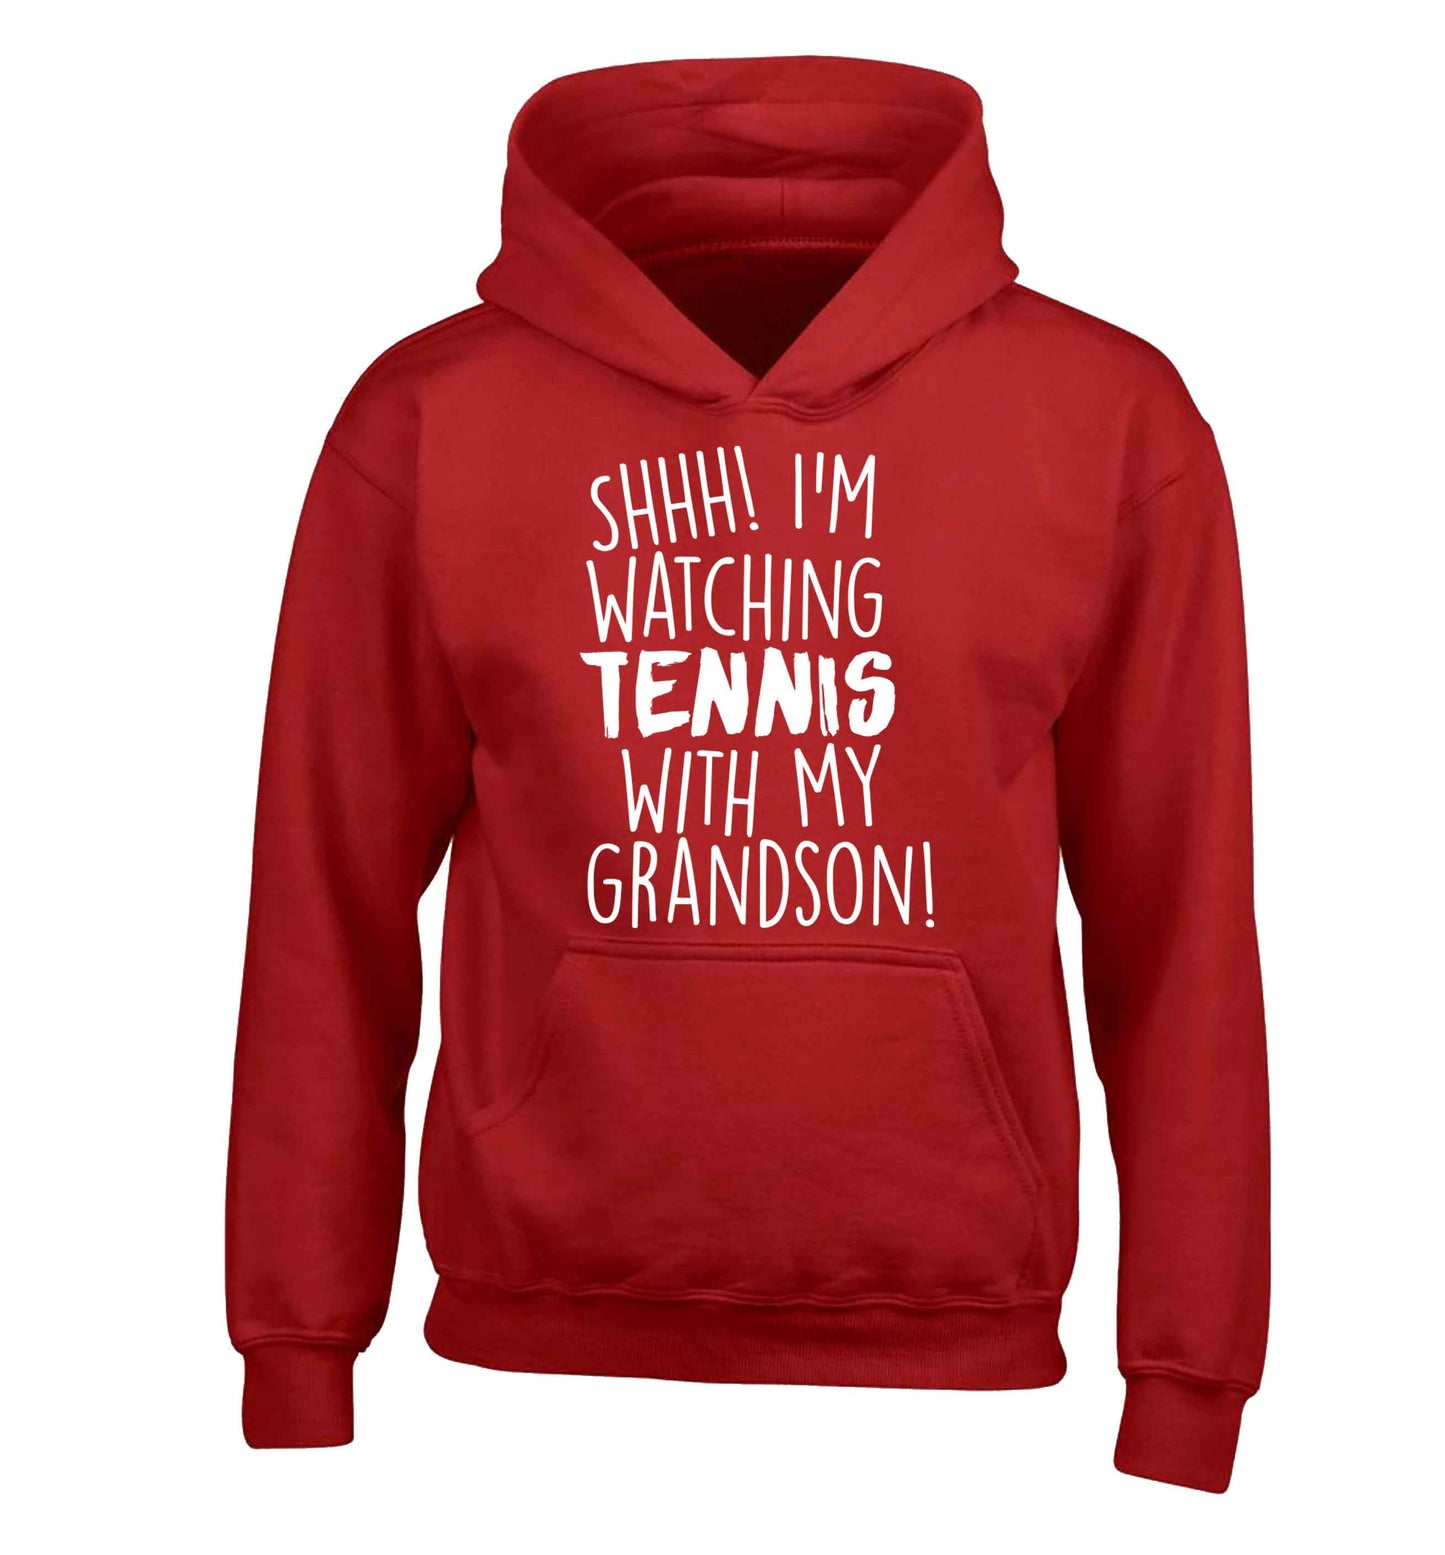 Shh! I'm watching tennis with my grandson! children's red hoodie 12-13 Years